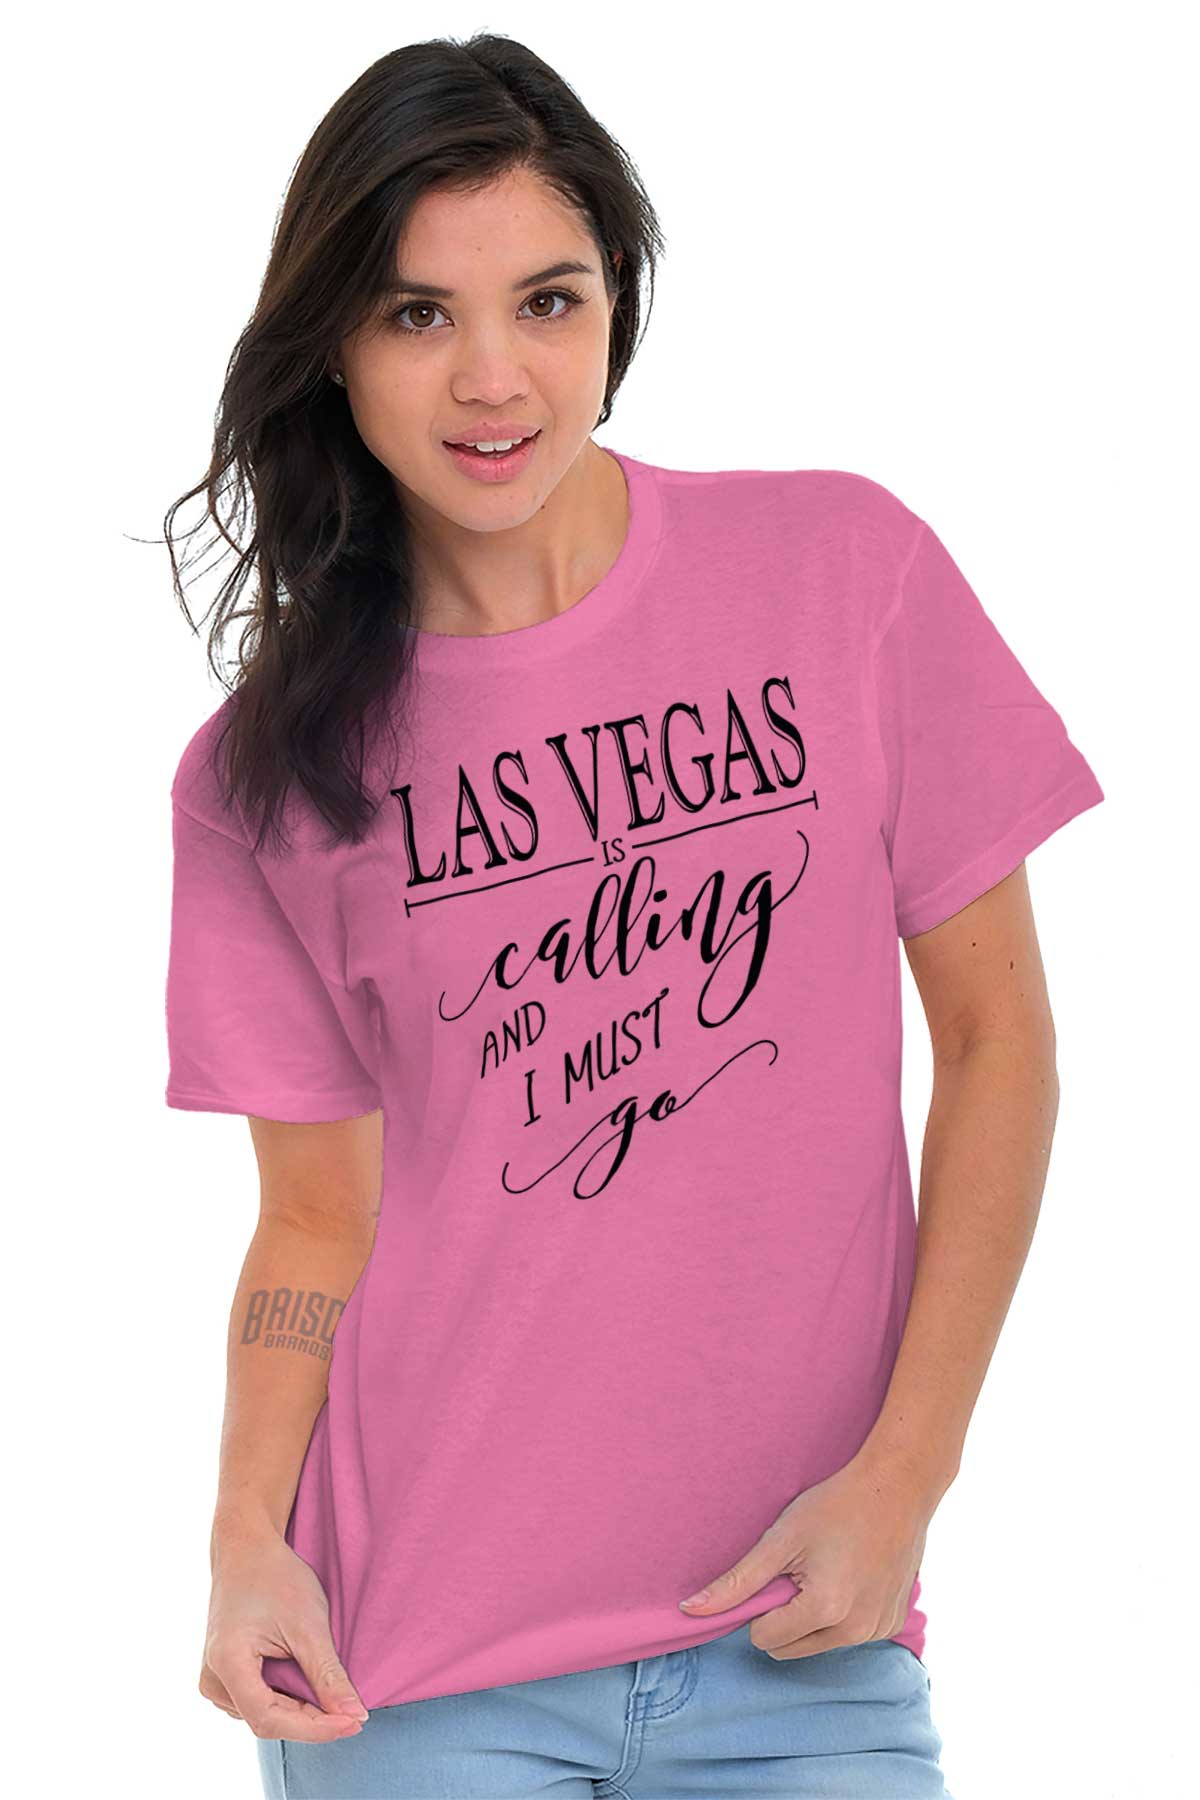 Las Vegas is Calling I Must Go Women's Graphic T Shirt Tees Brisco Brands M - image 1 of 6